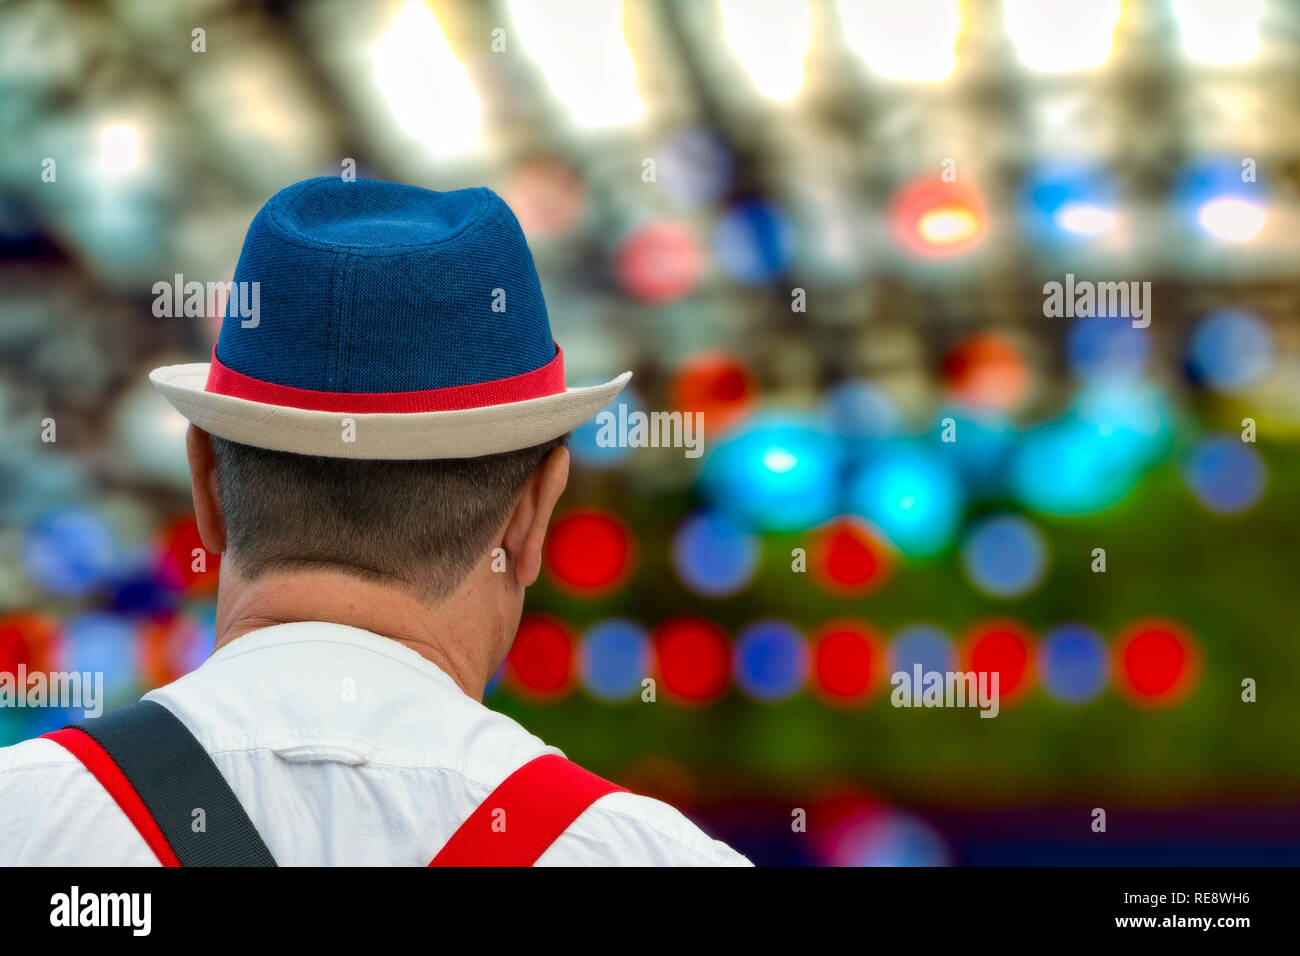 man in blue hat at outdoor music festival Stock Photo